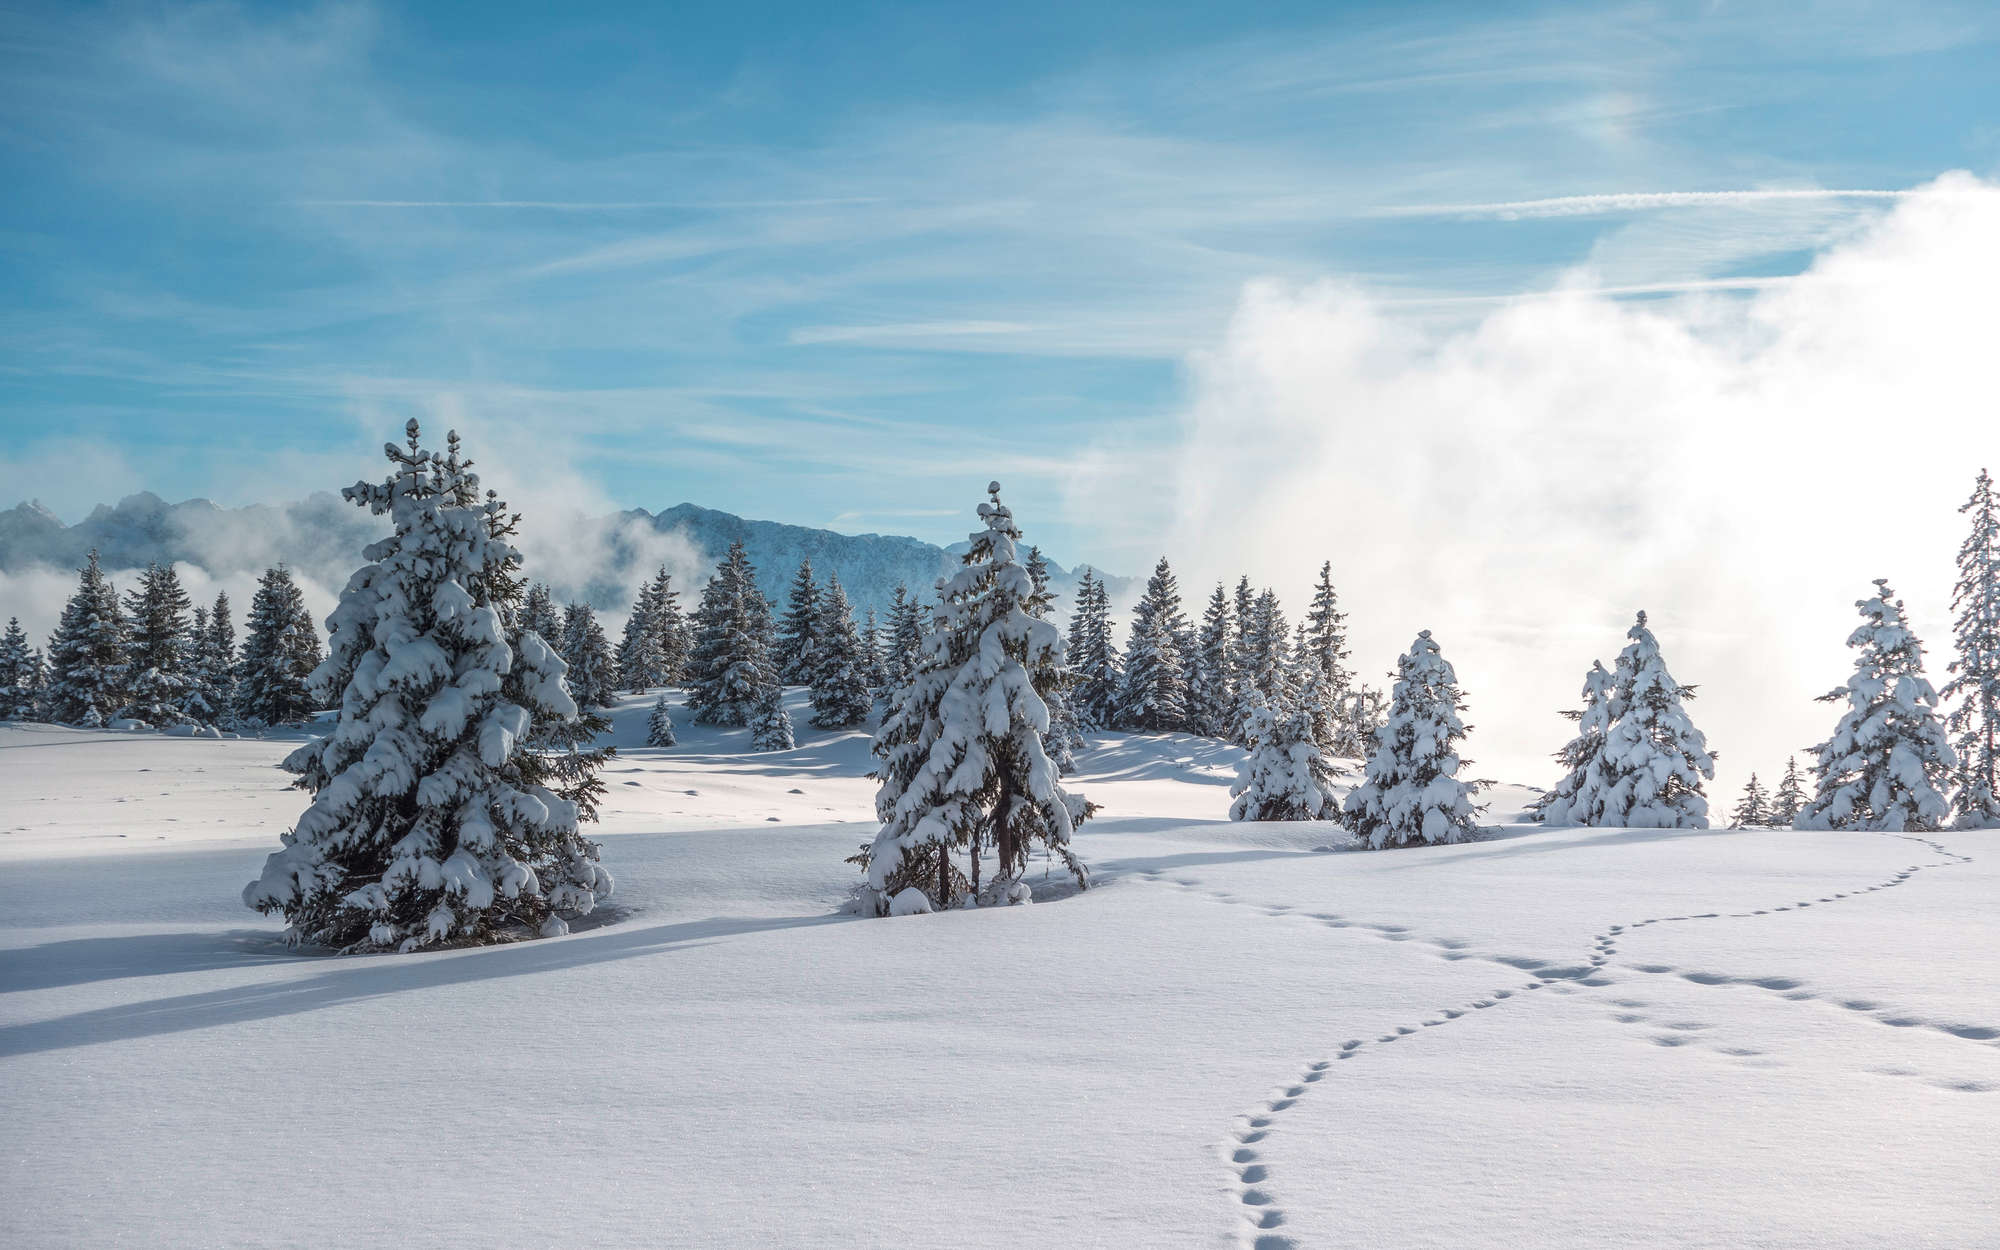             Photo wallpaper Snow and footprints in the winter forest - Premium smooth fleece
        